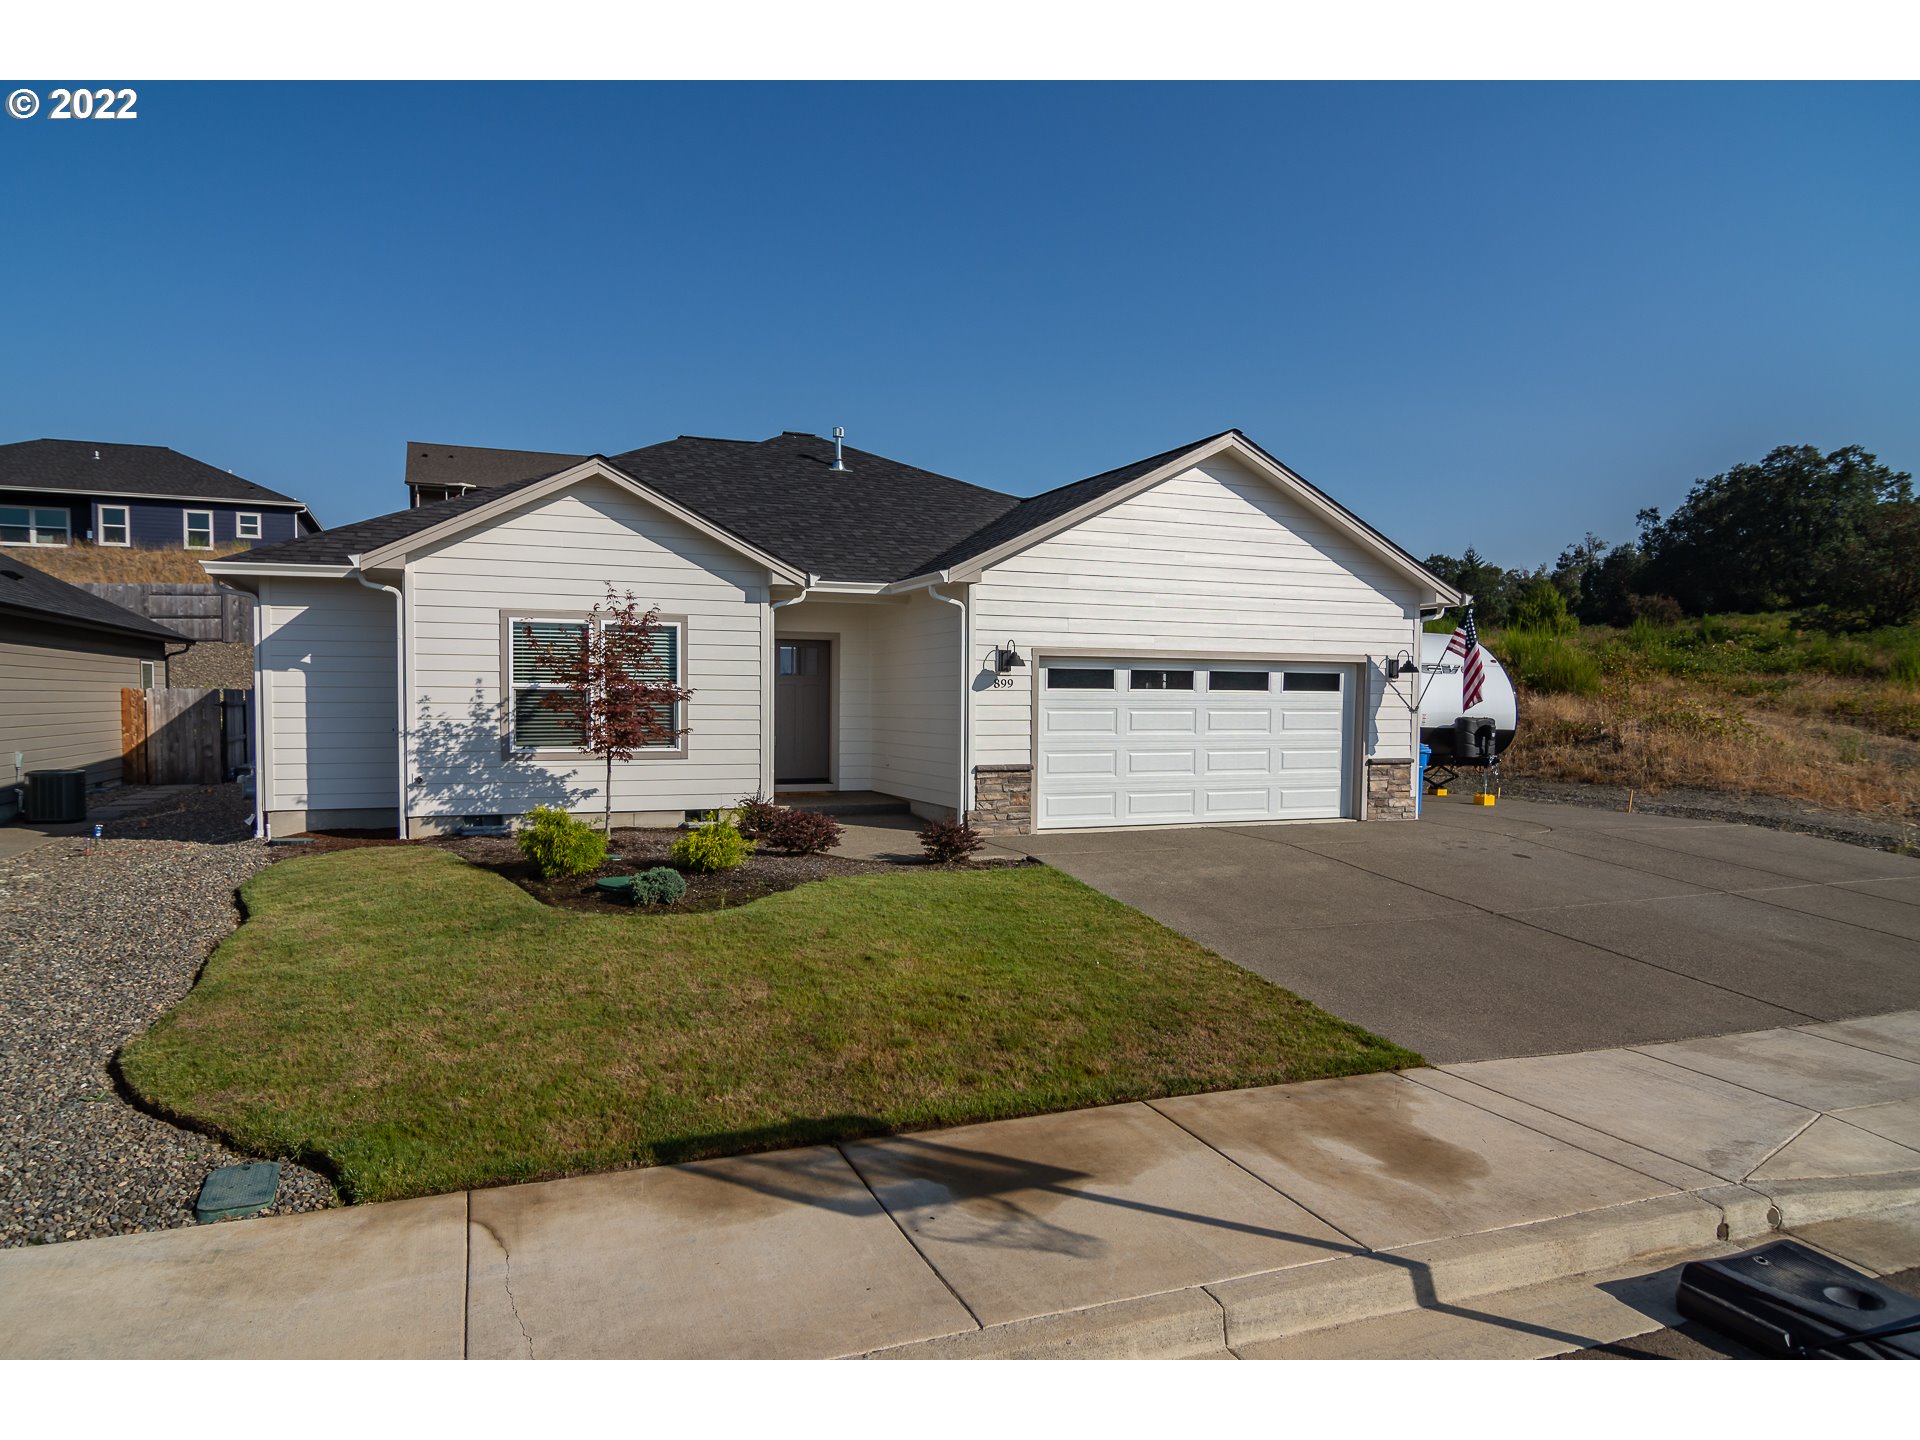 899 SAND PINES AVE, Sutherlin, OR 97479